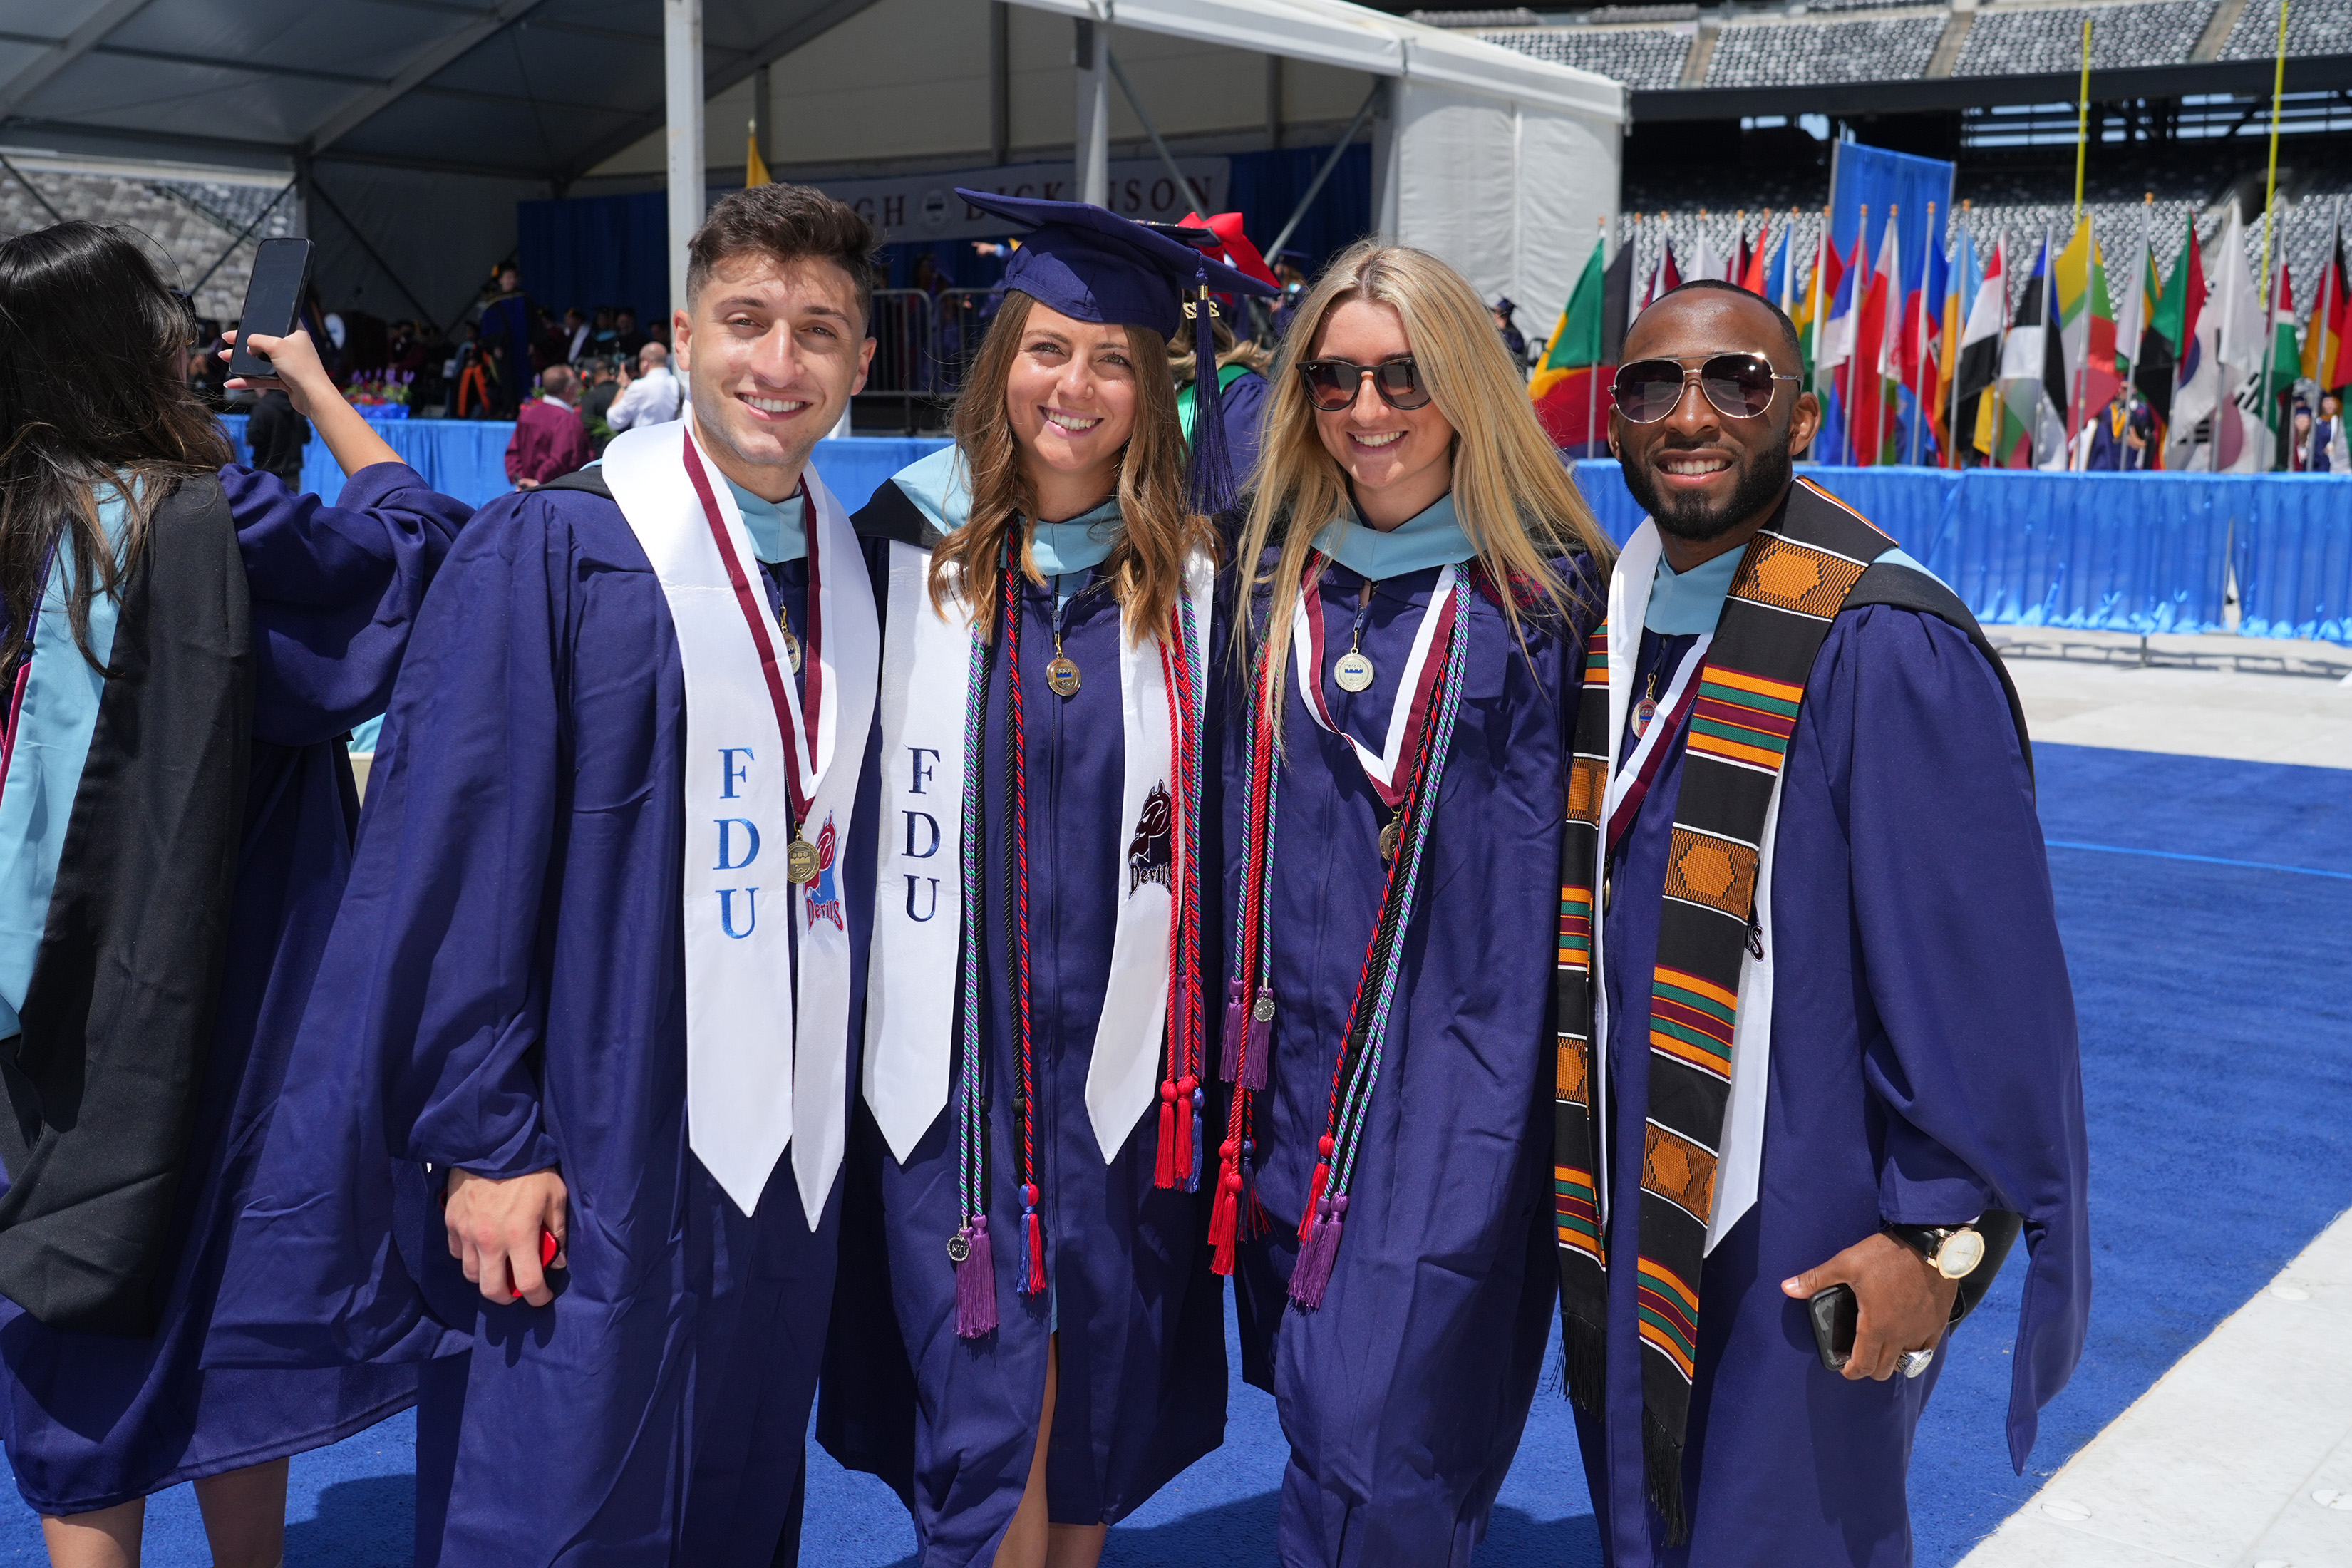 FDU Students at Commencement